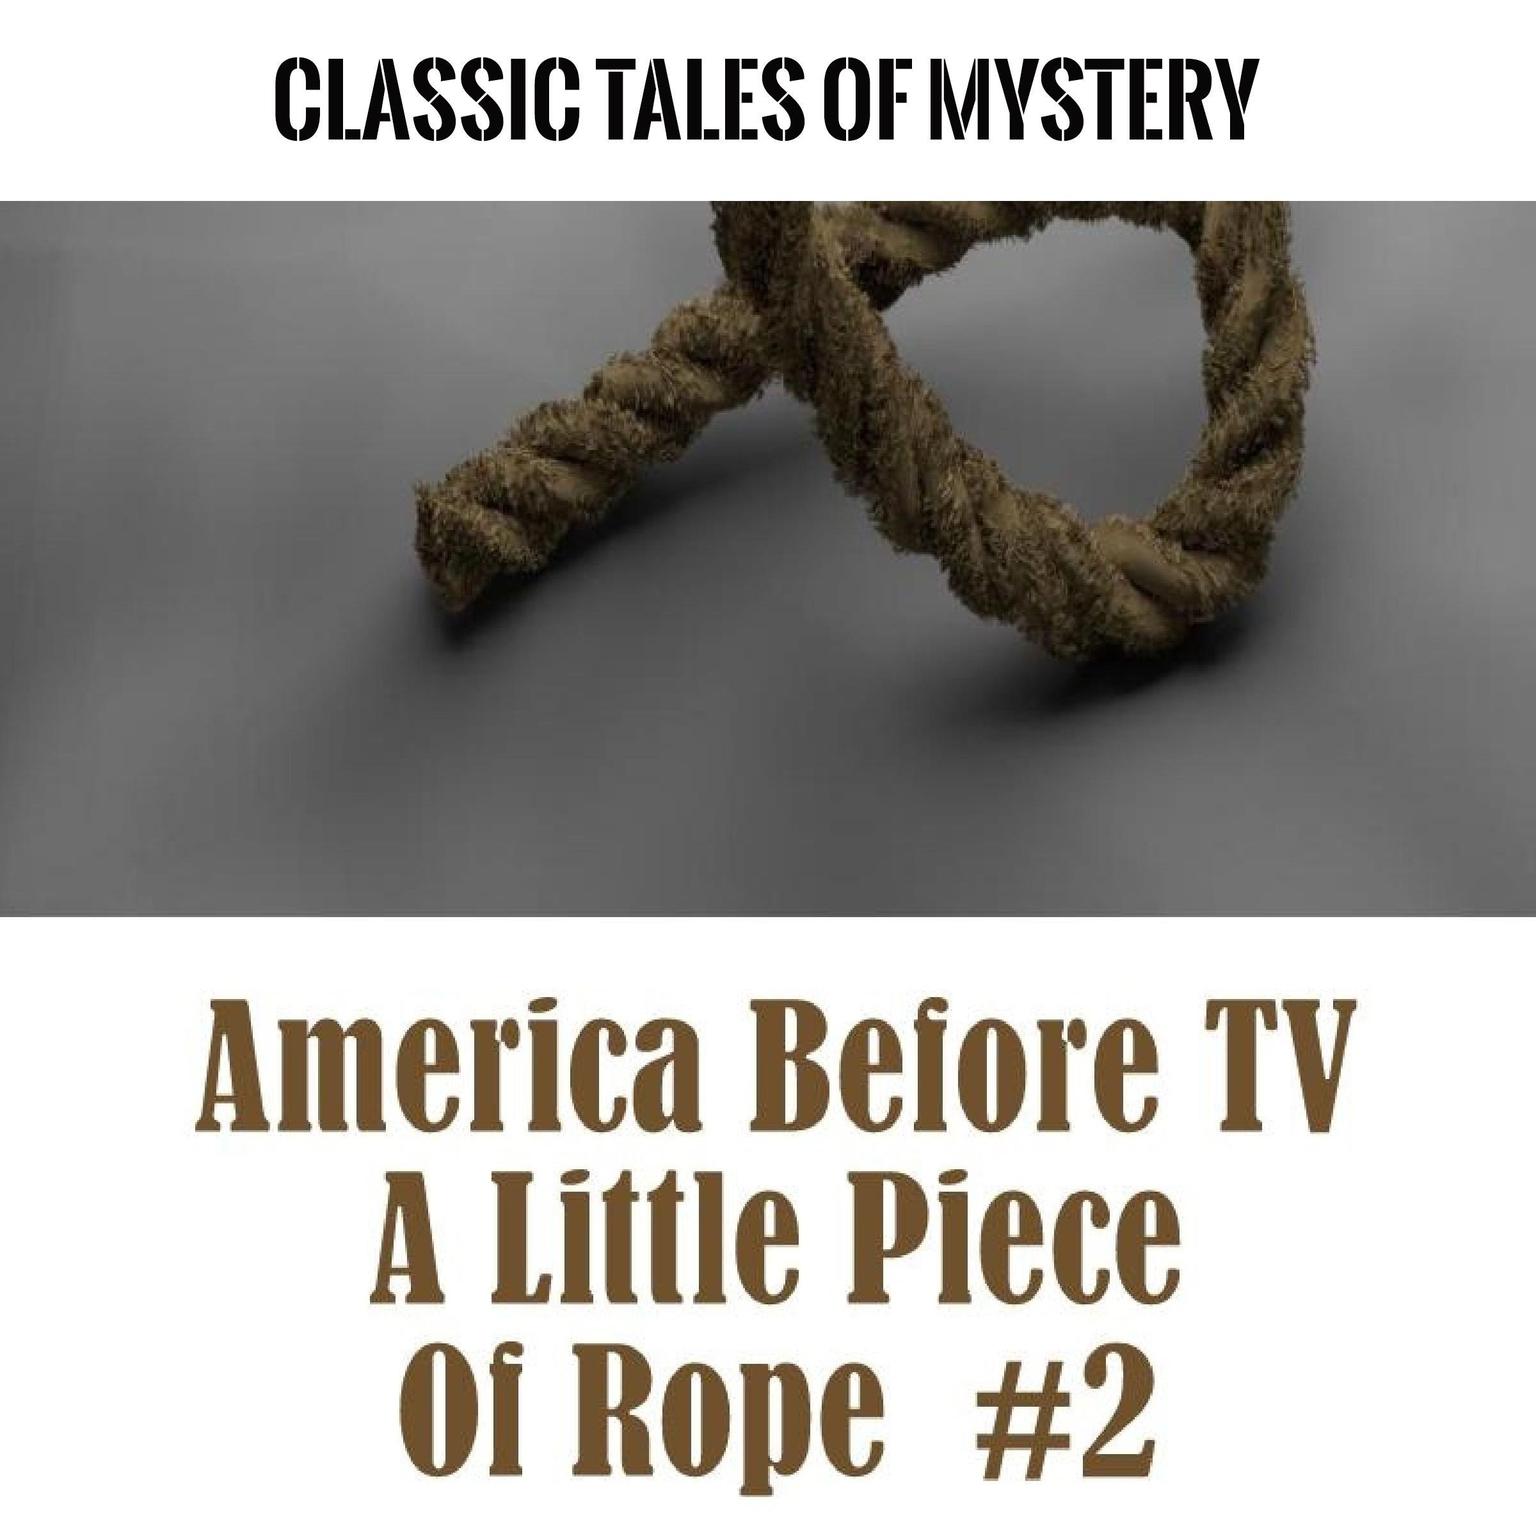 America Before TV - A Little Piece Of Rope  #2 (Abridged) Audiobook, by Classic Tales of Mystery